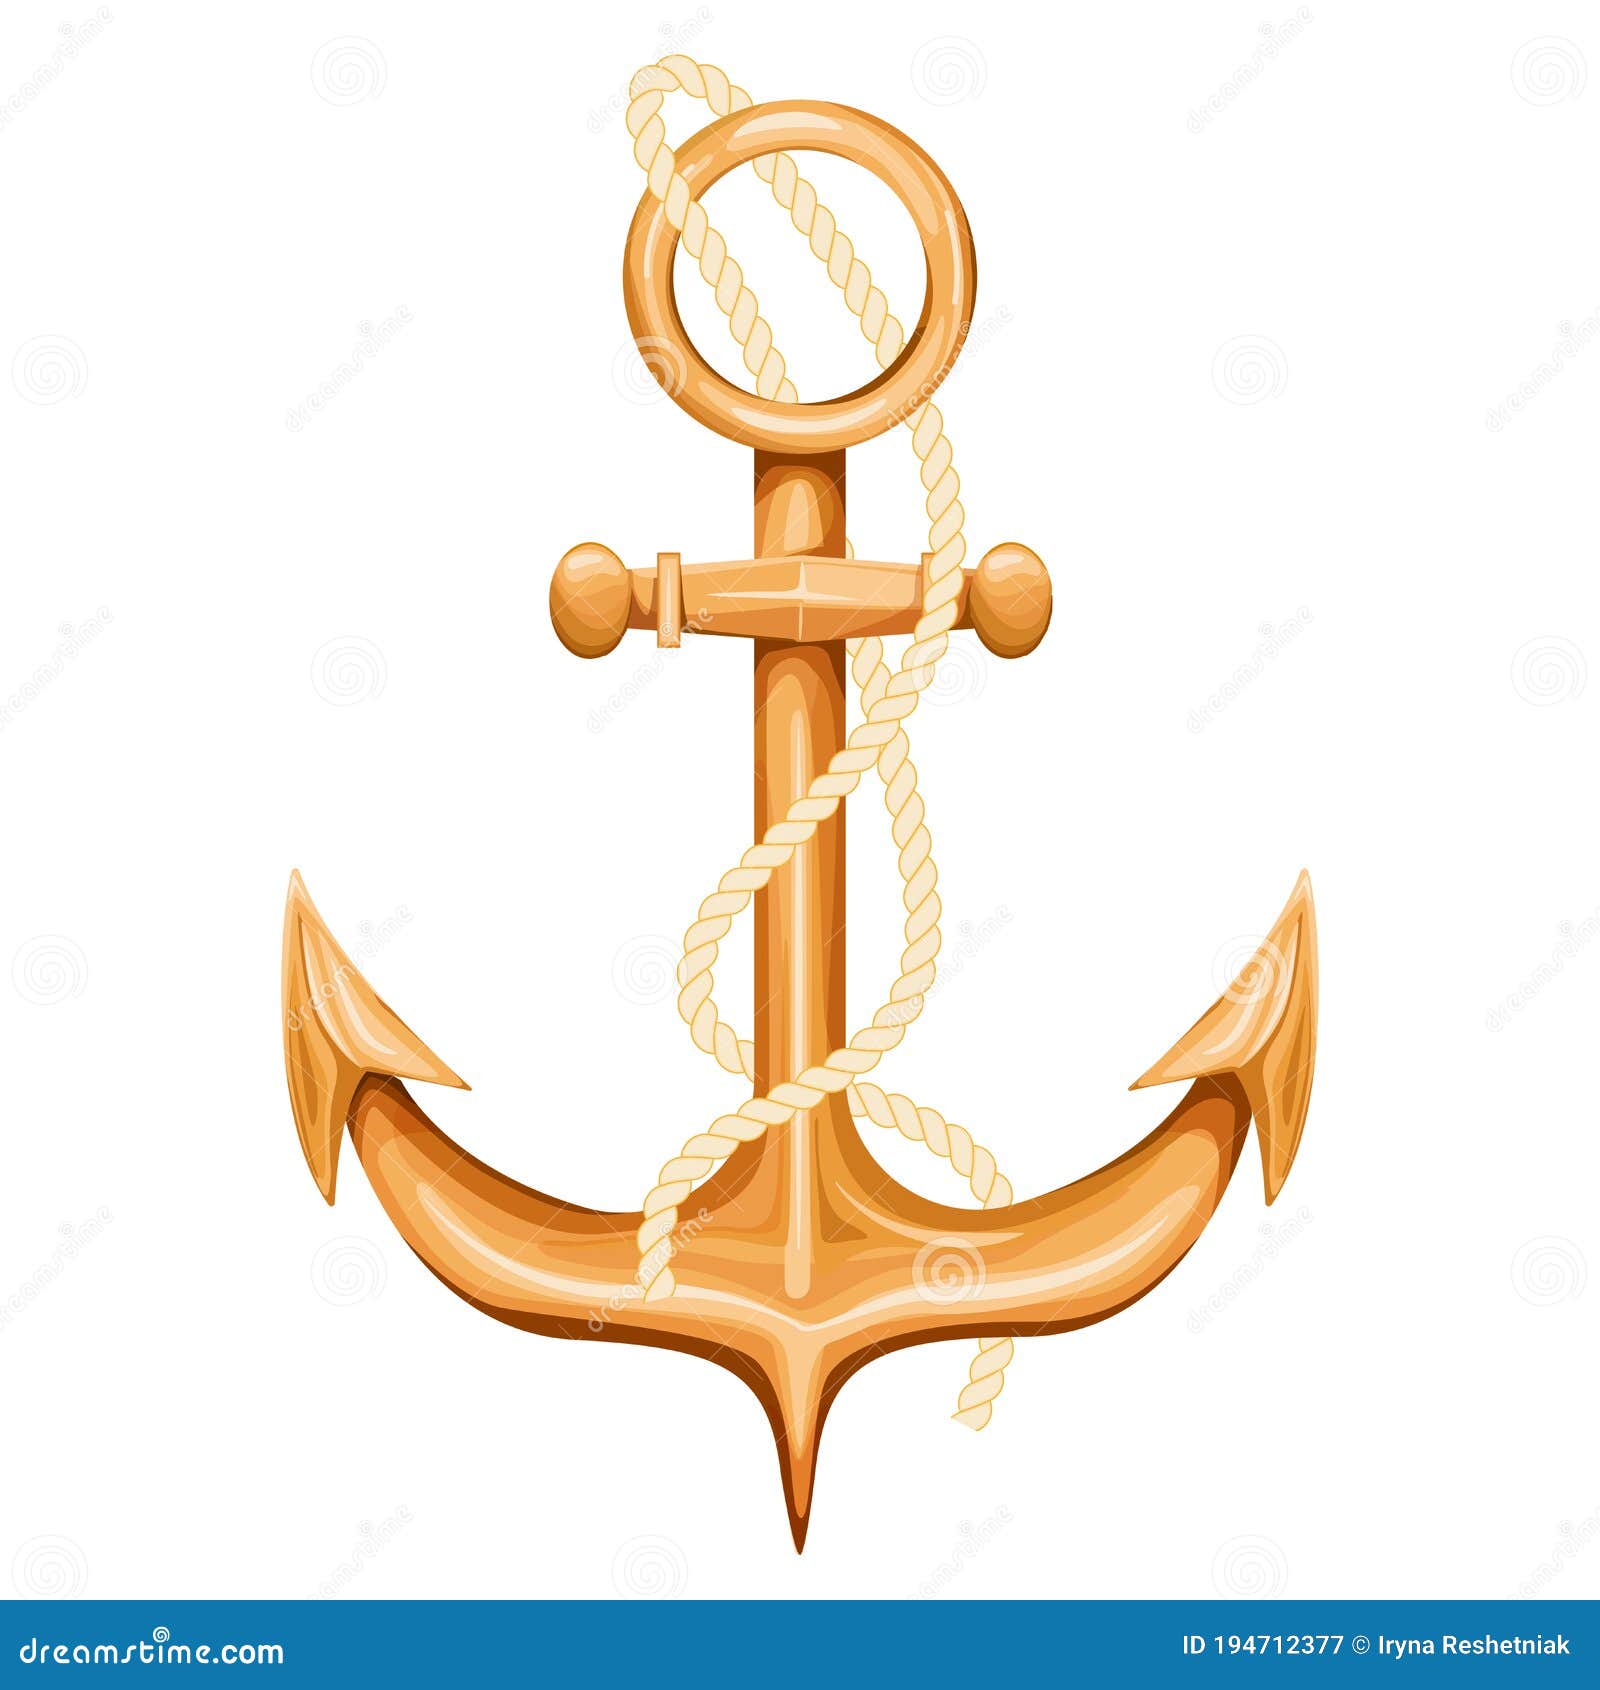 Golden Marine Boat Anchor with Rope. Marine Element Stock Vector